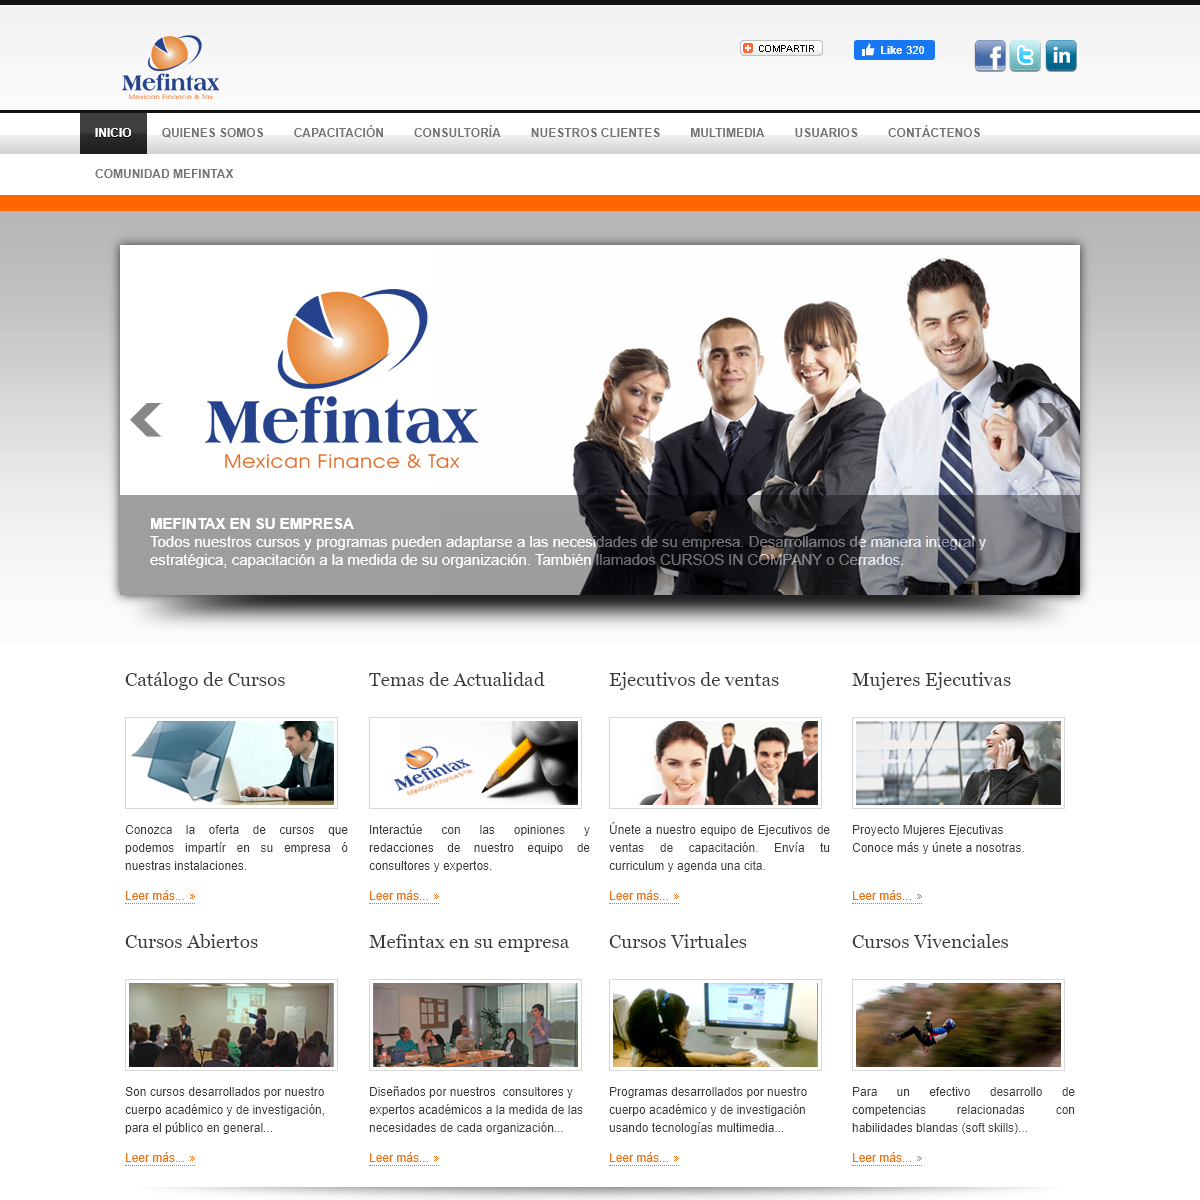 A complete backup of mefintax.mx